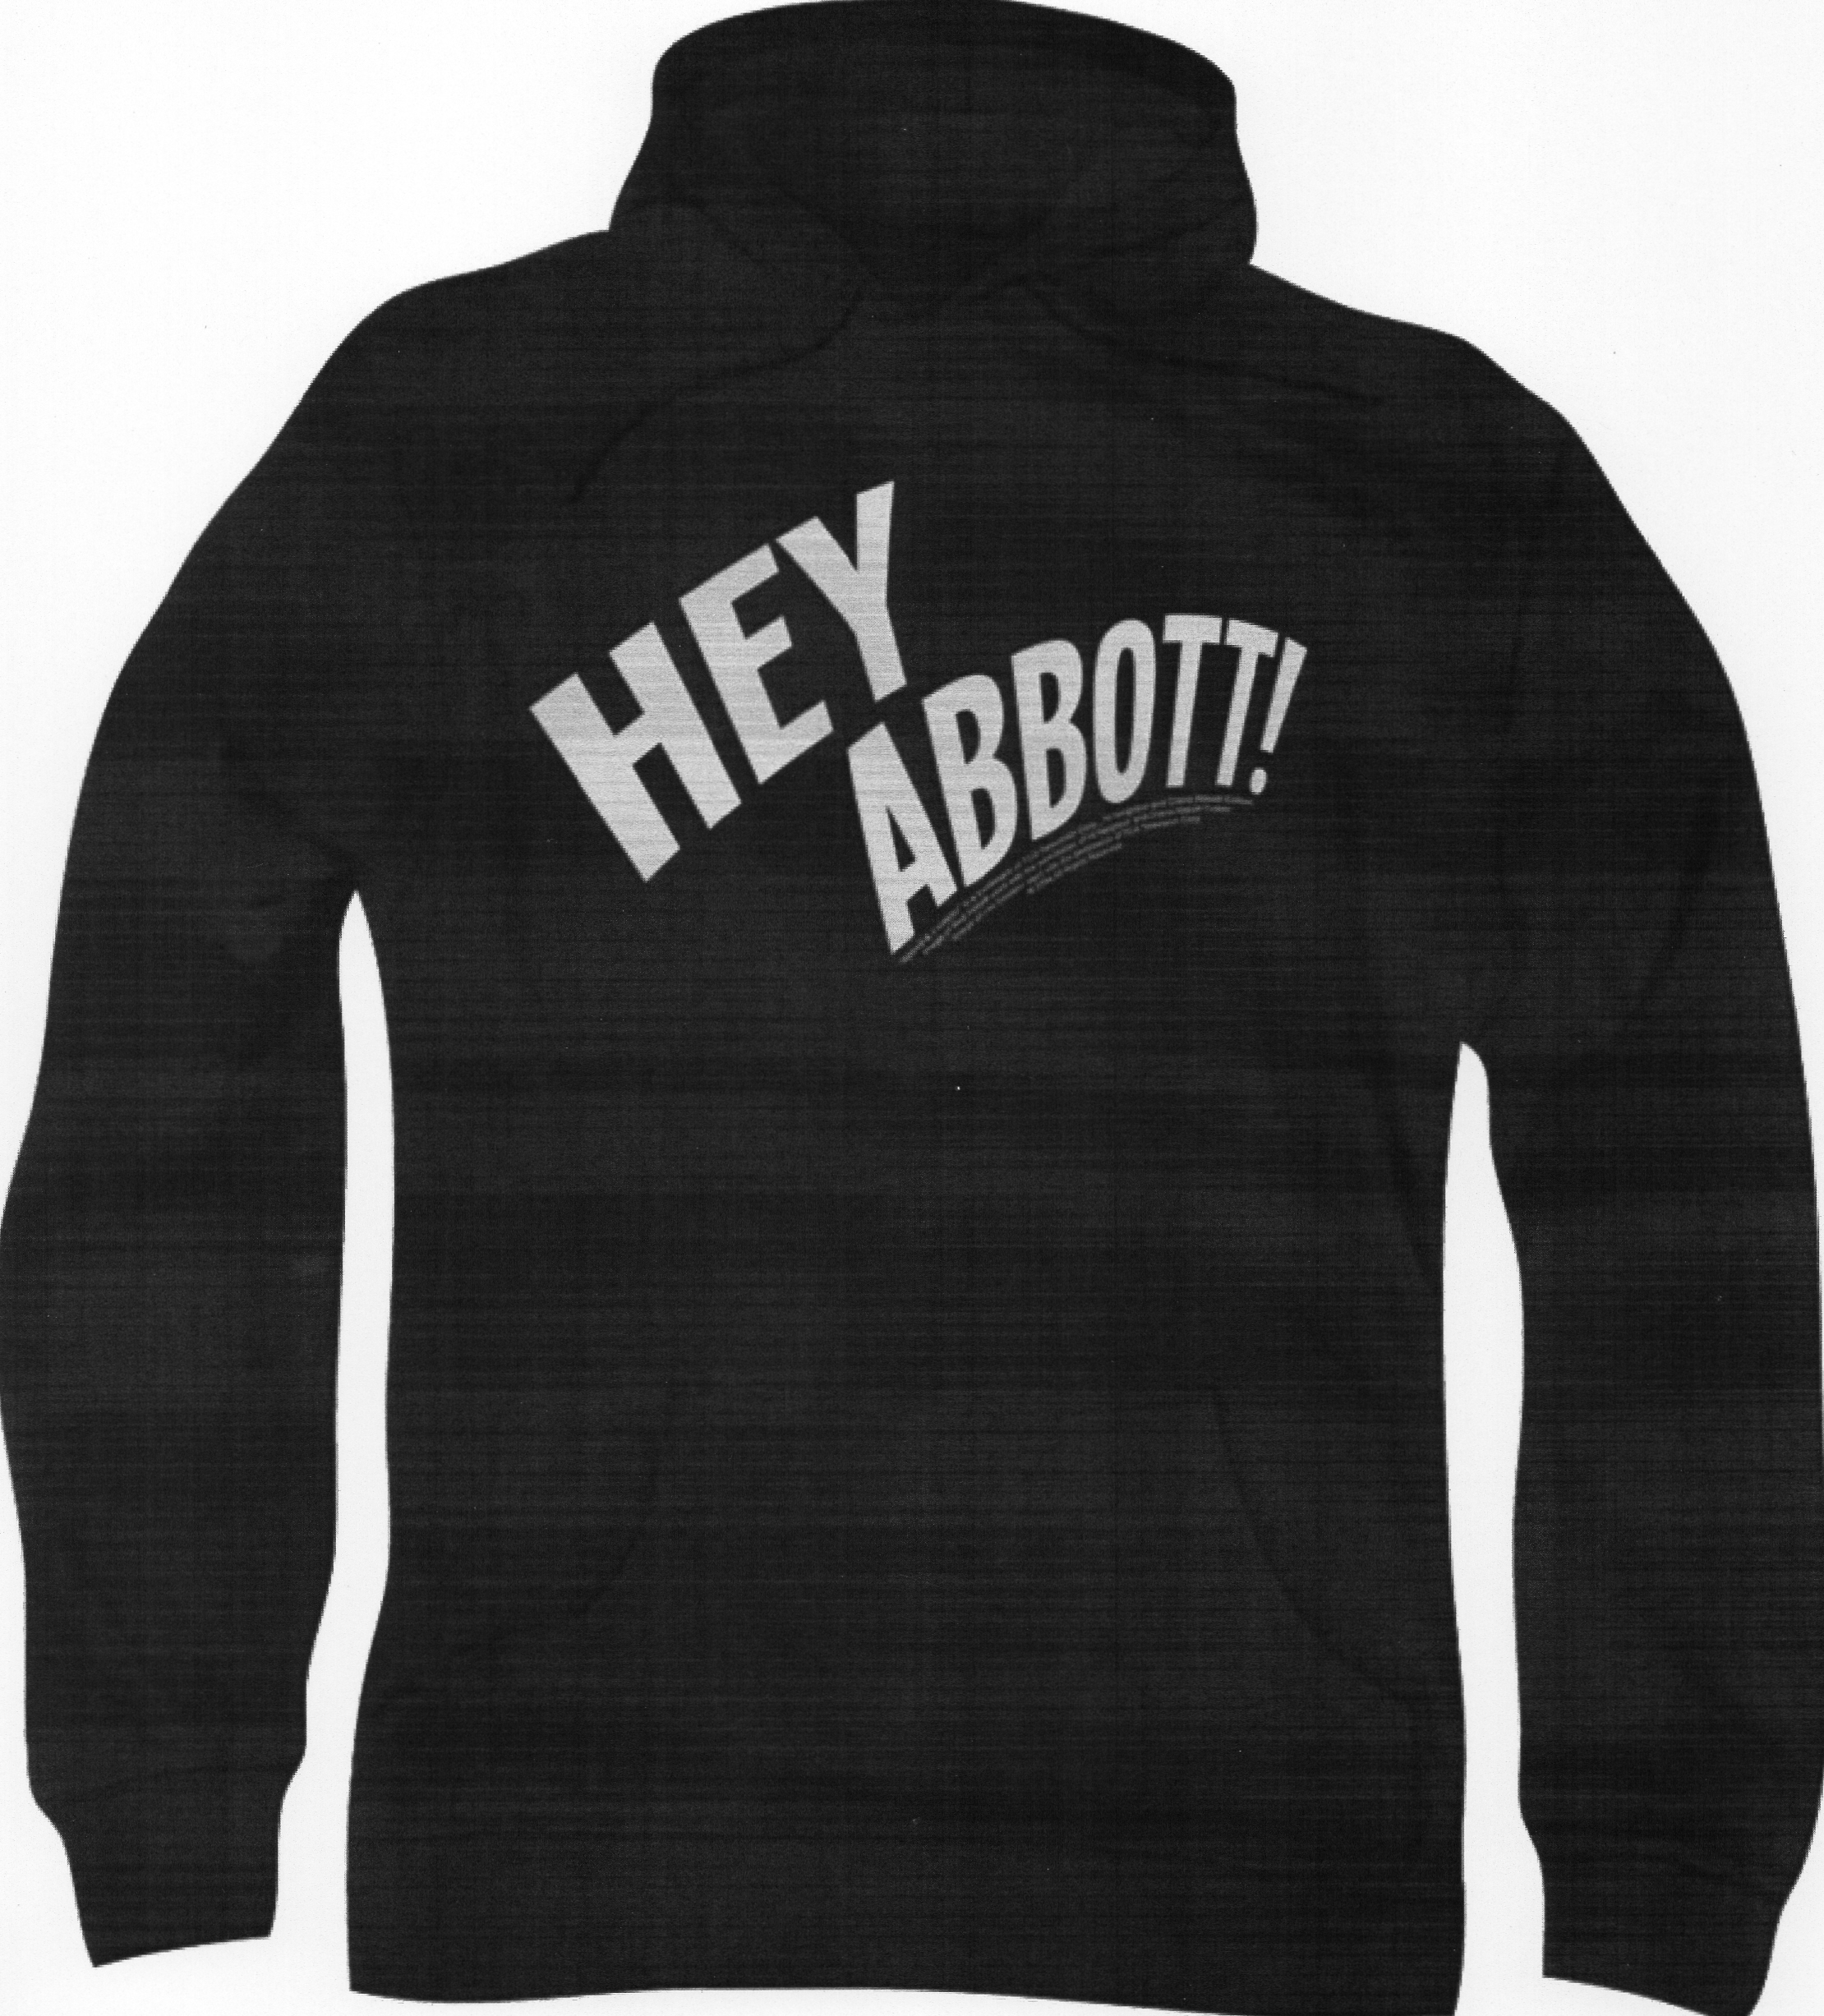 Hey Abbott! Pull-Over Hoodie - Click Image to Close